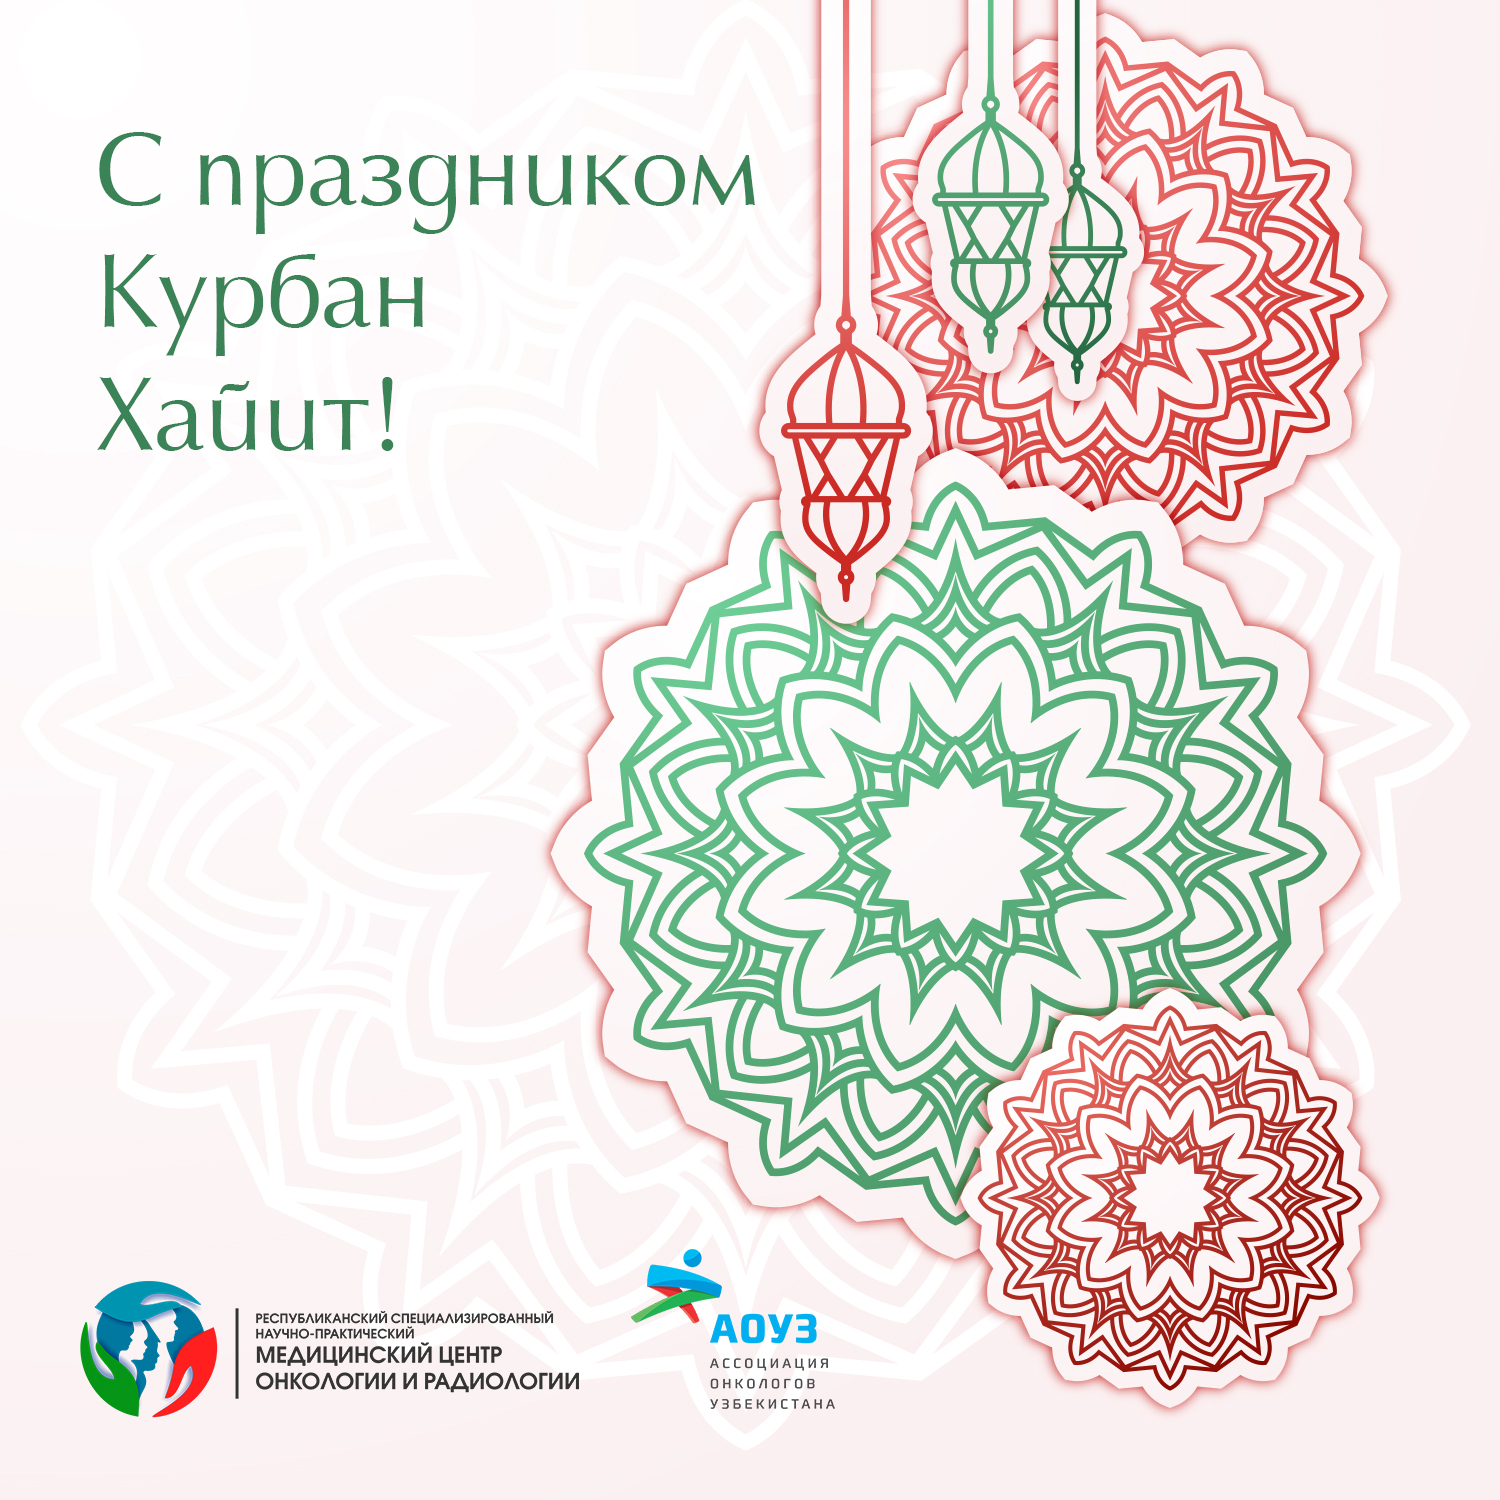 The Oncologists Association of Uzbekistan congratulates on the blessed holiday Kurban Hayit